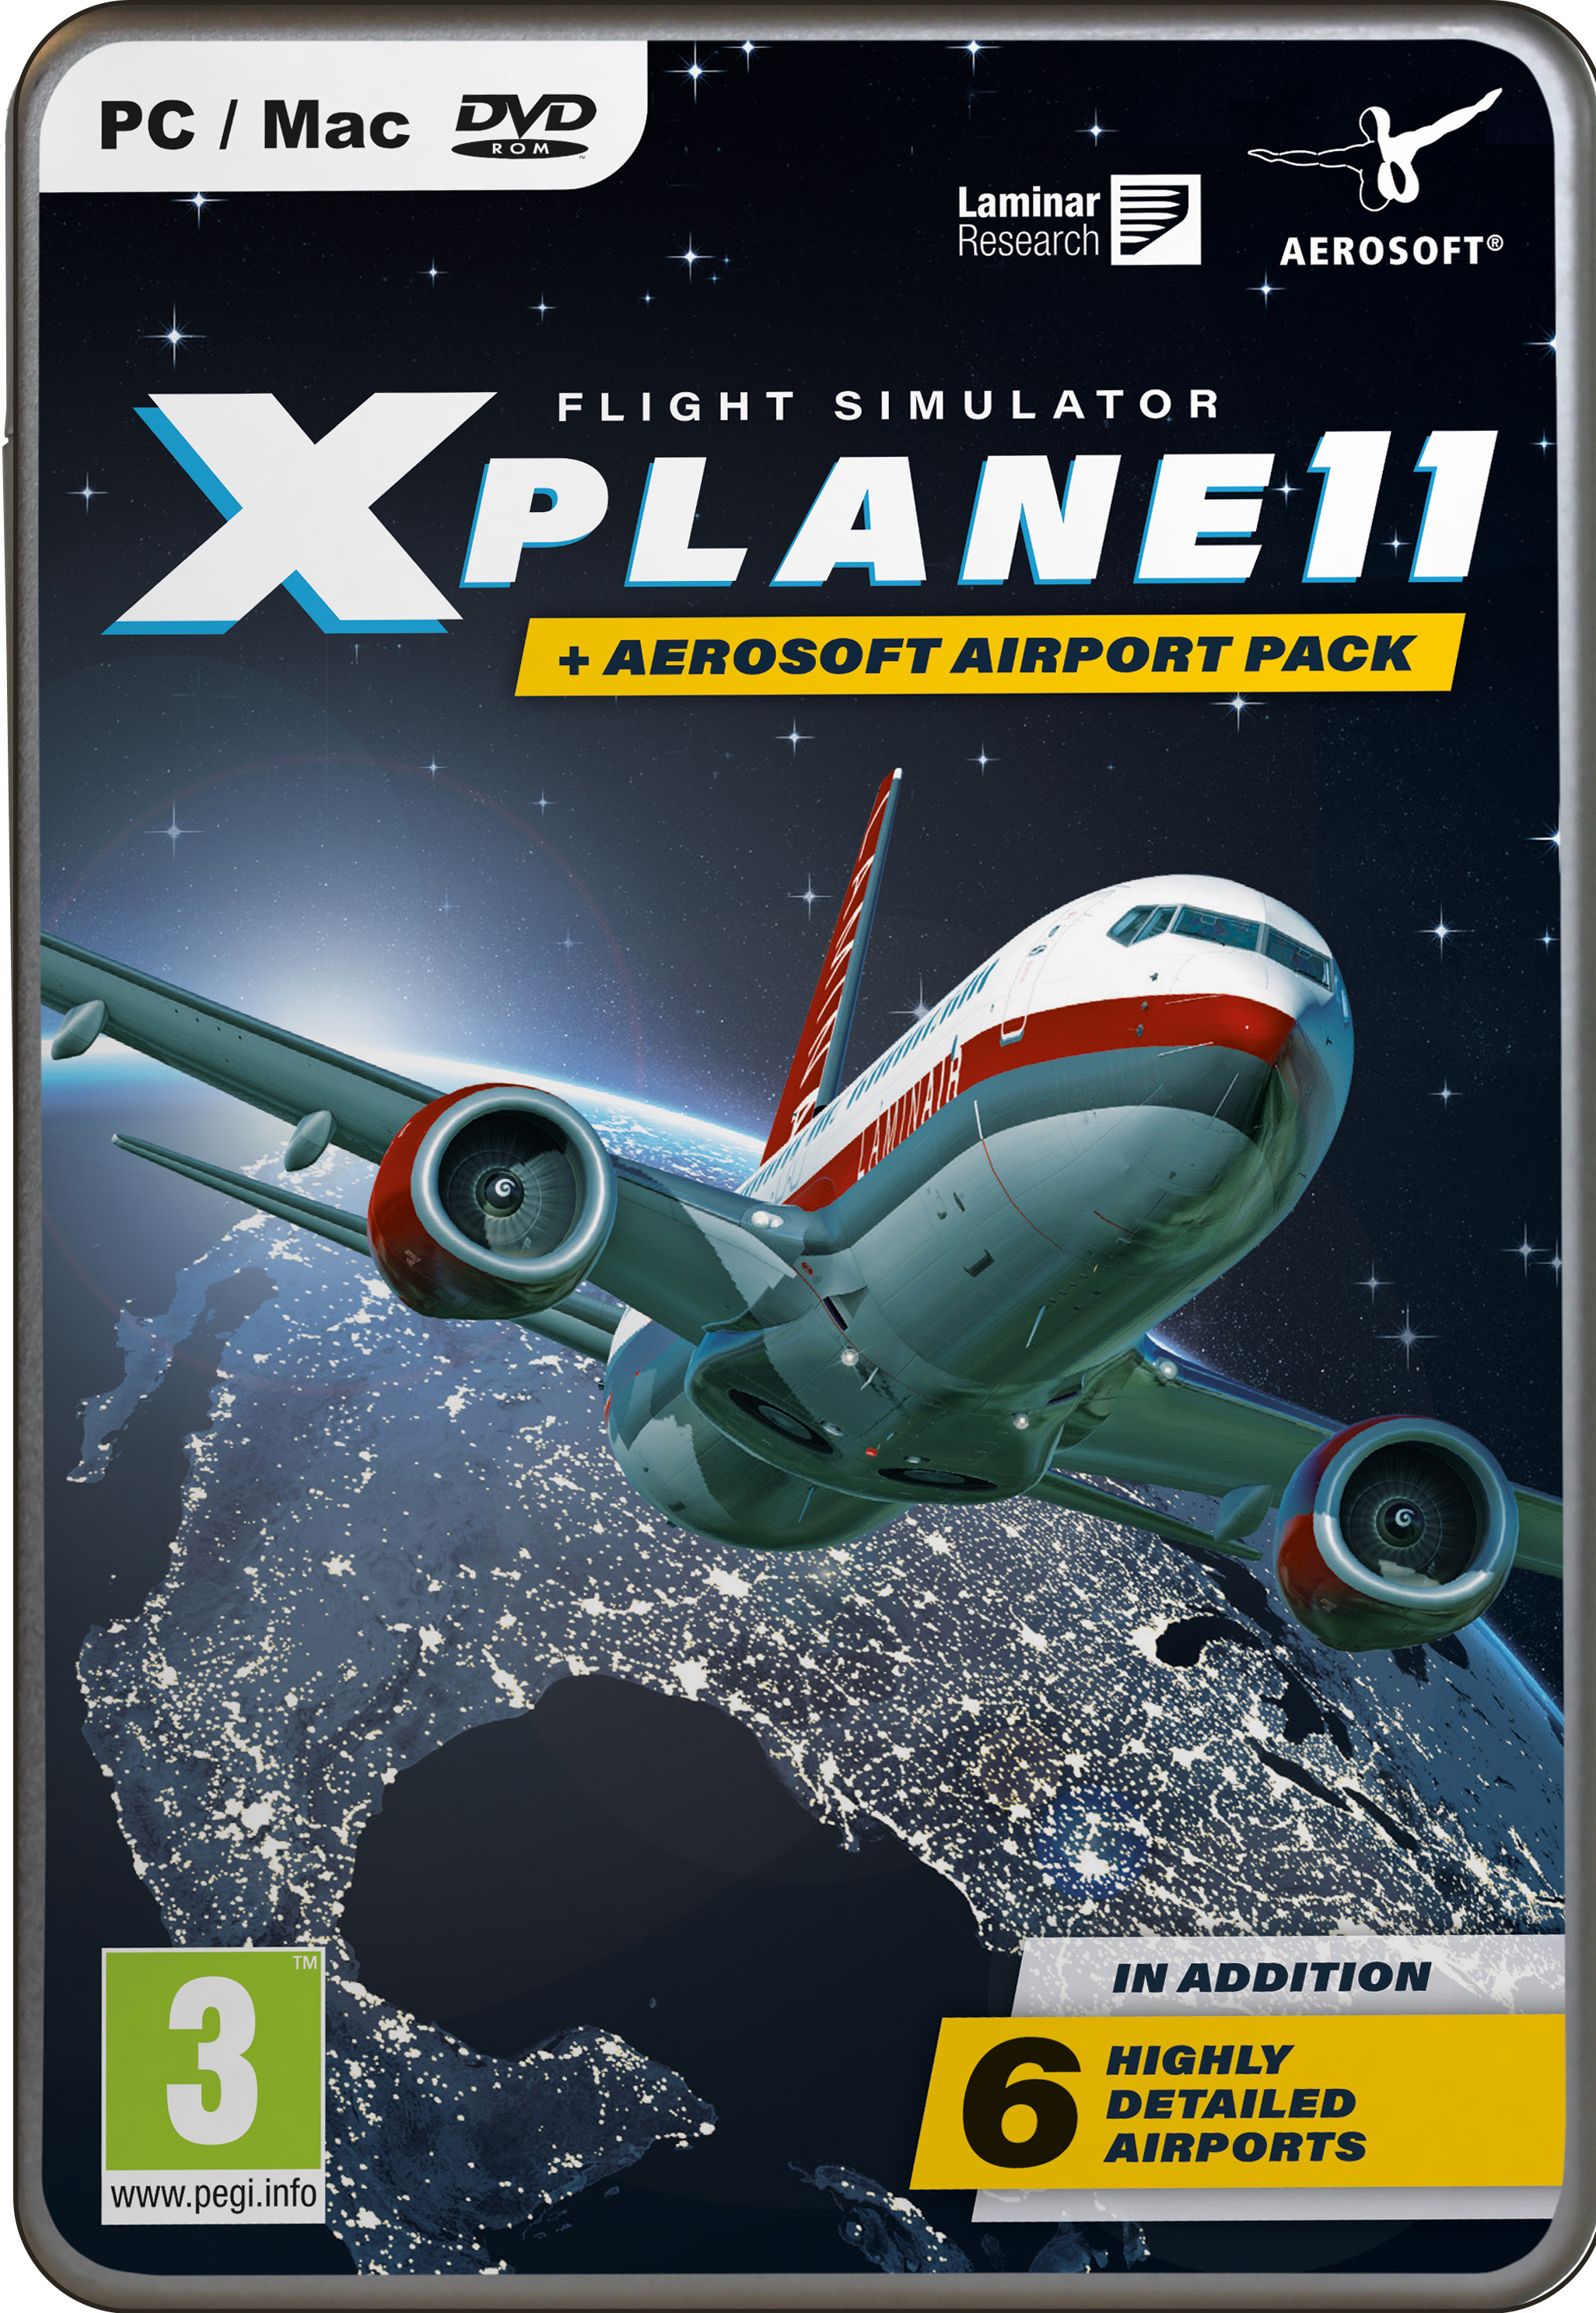 download xplane11 for free